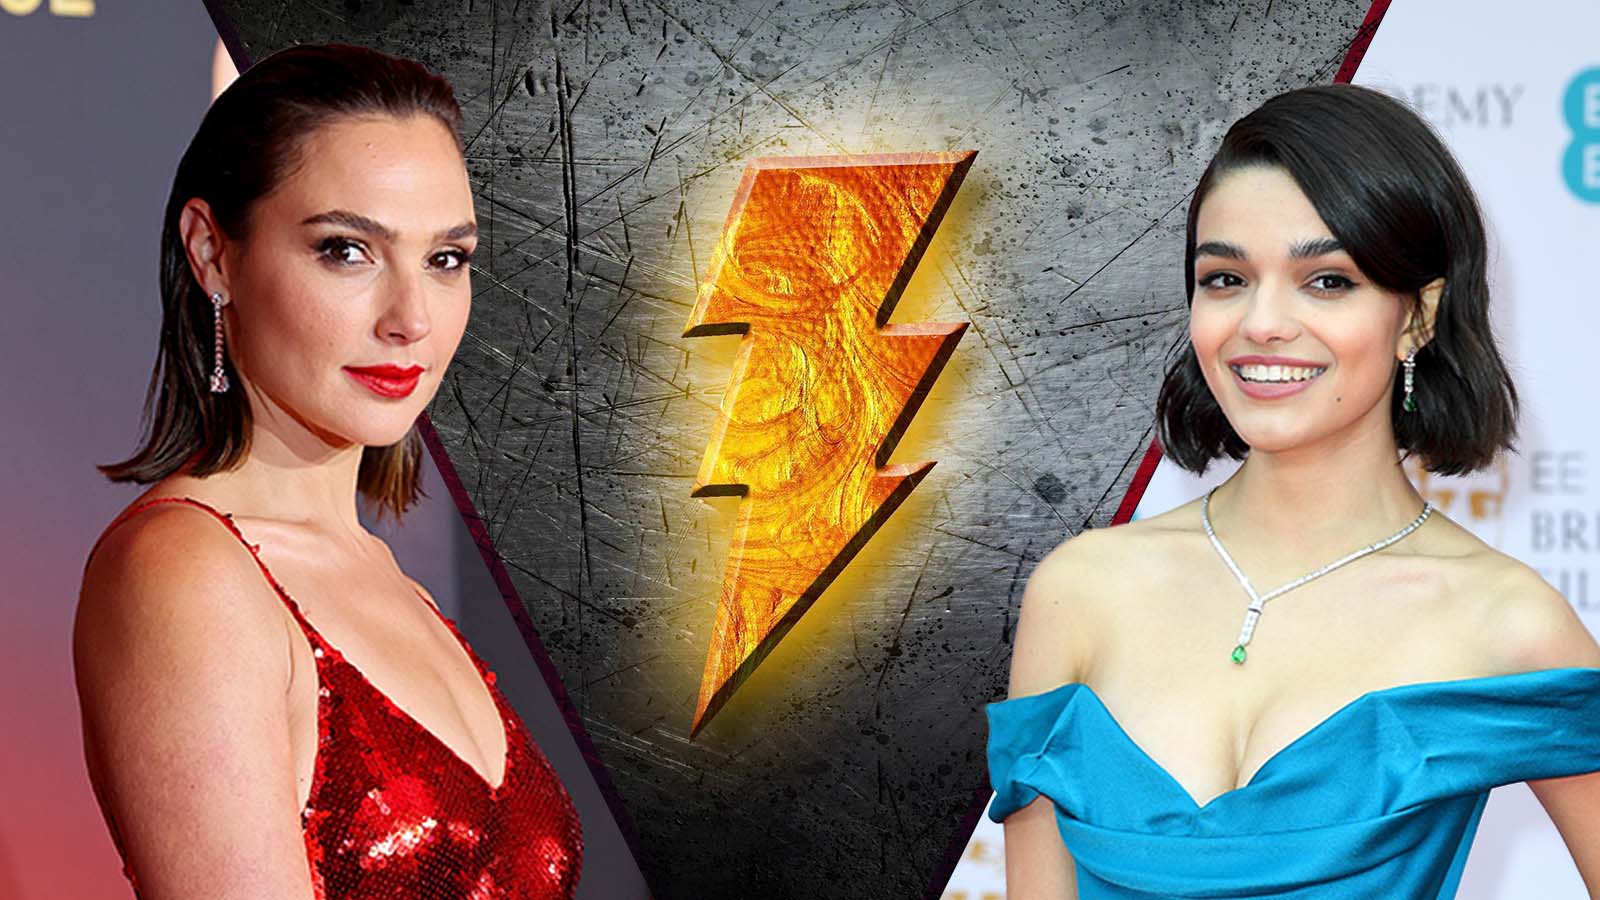 Shazam!: Fury of the Gods' Director on That Wonder Woman Cameo